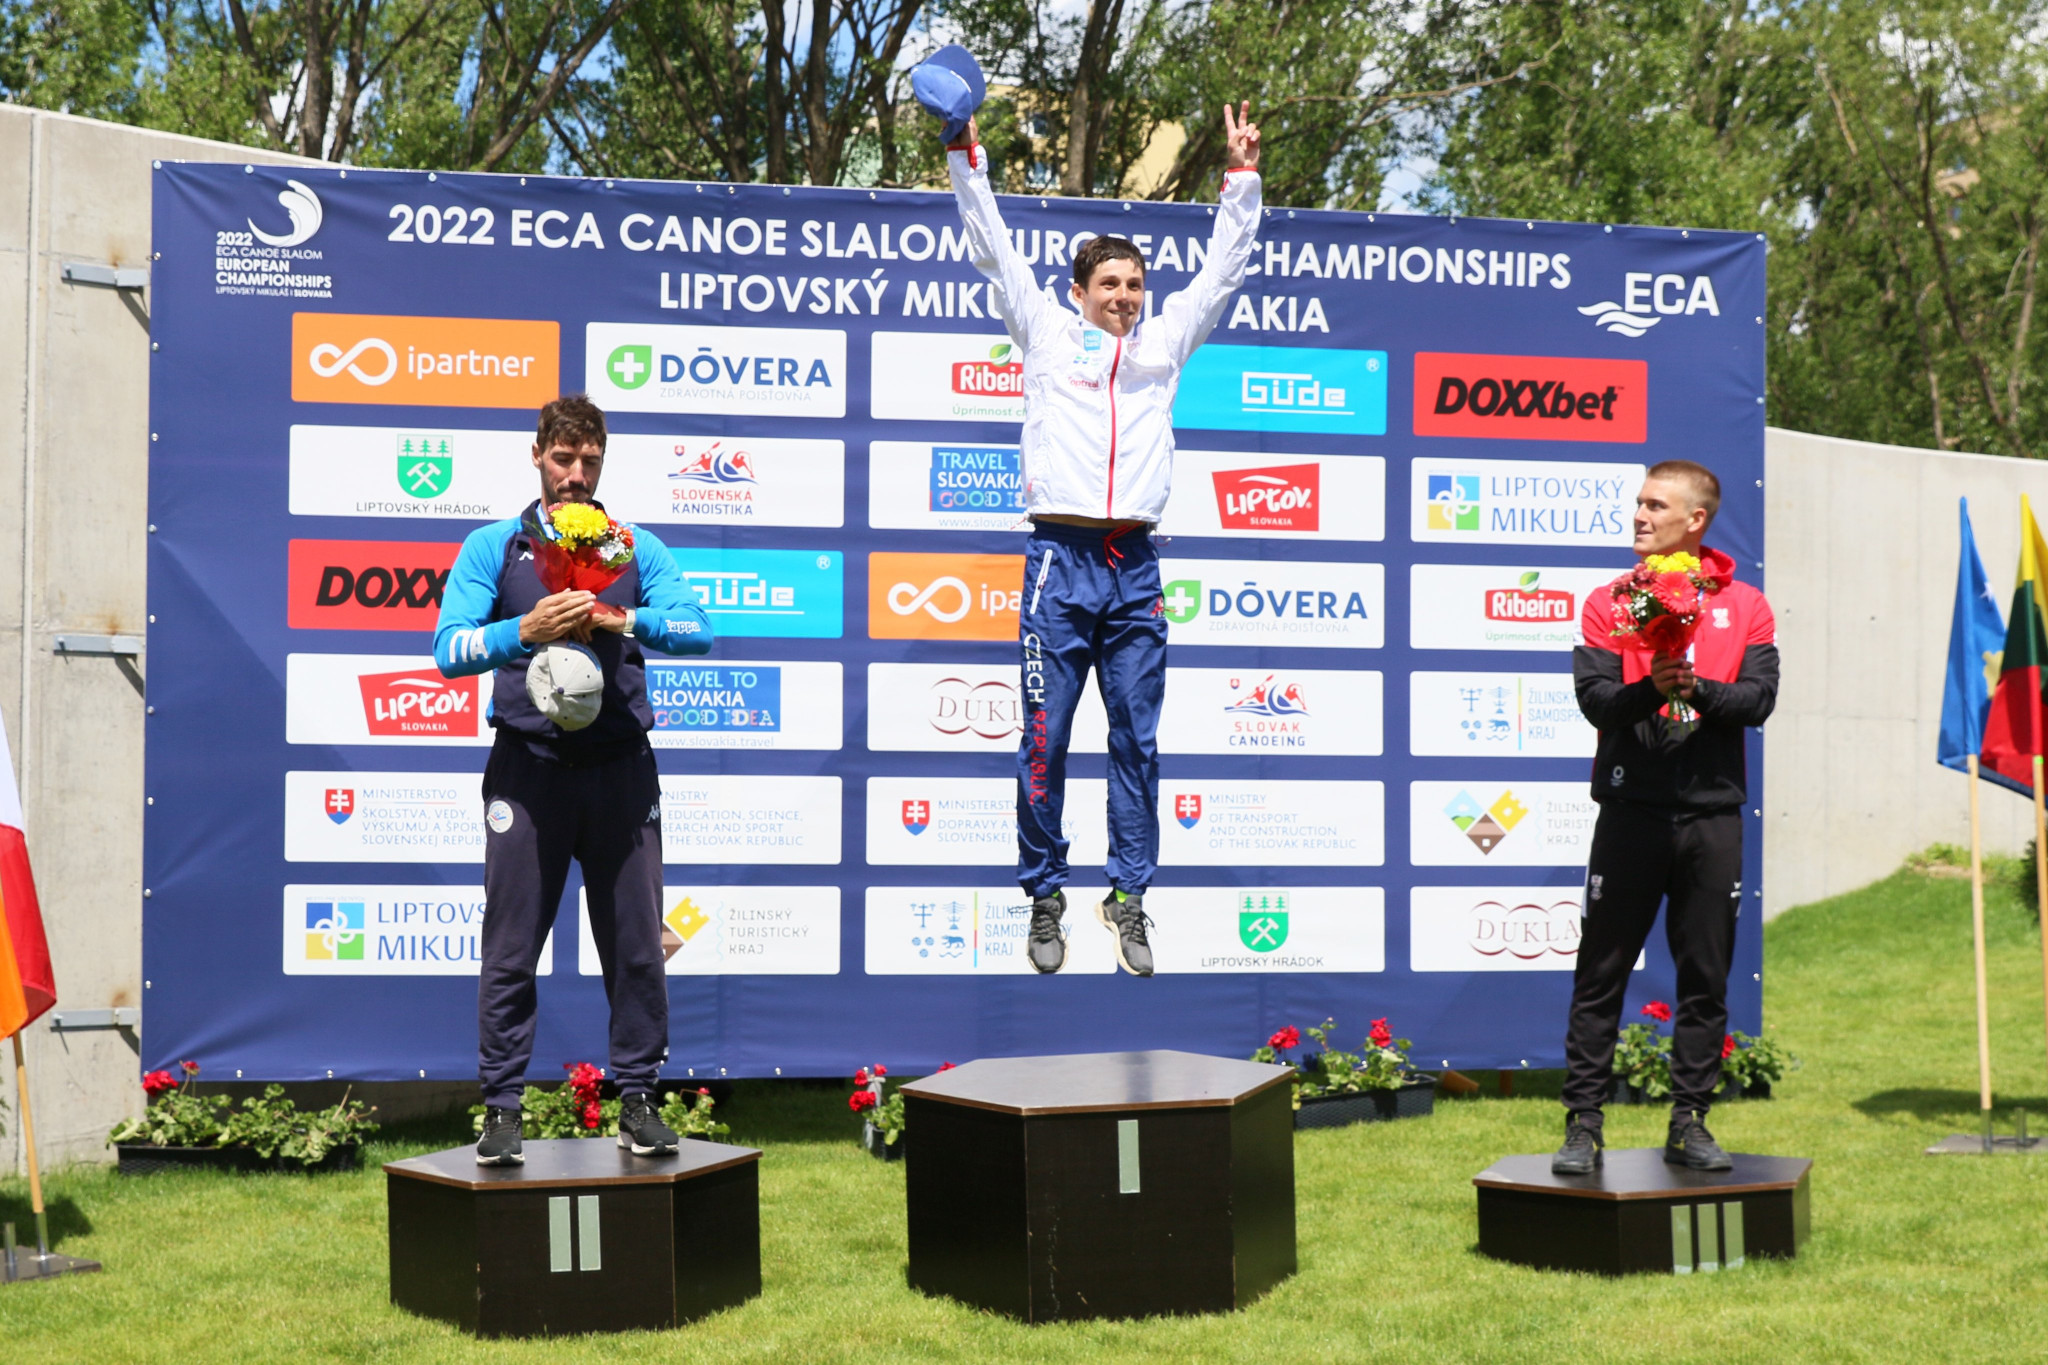 Jiří Prskavec of Czech Republic, centre, added to his Olympic gold medal with a fifth men's K1 victory at the ECA Canoe Slalom European Championships ©ECA